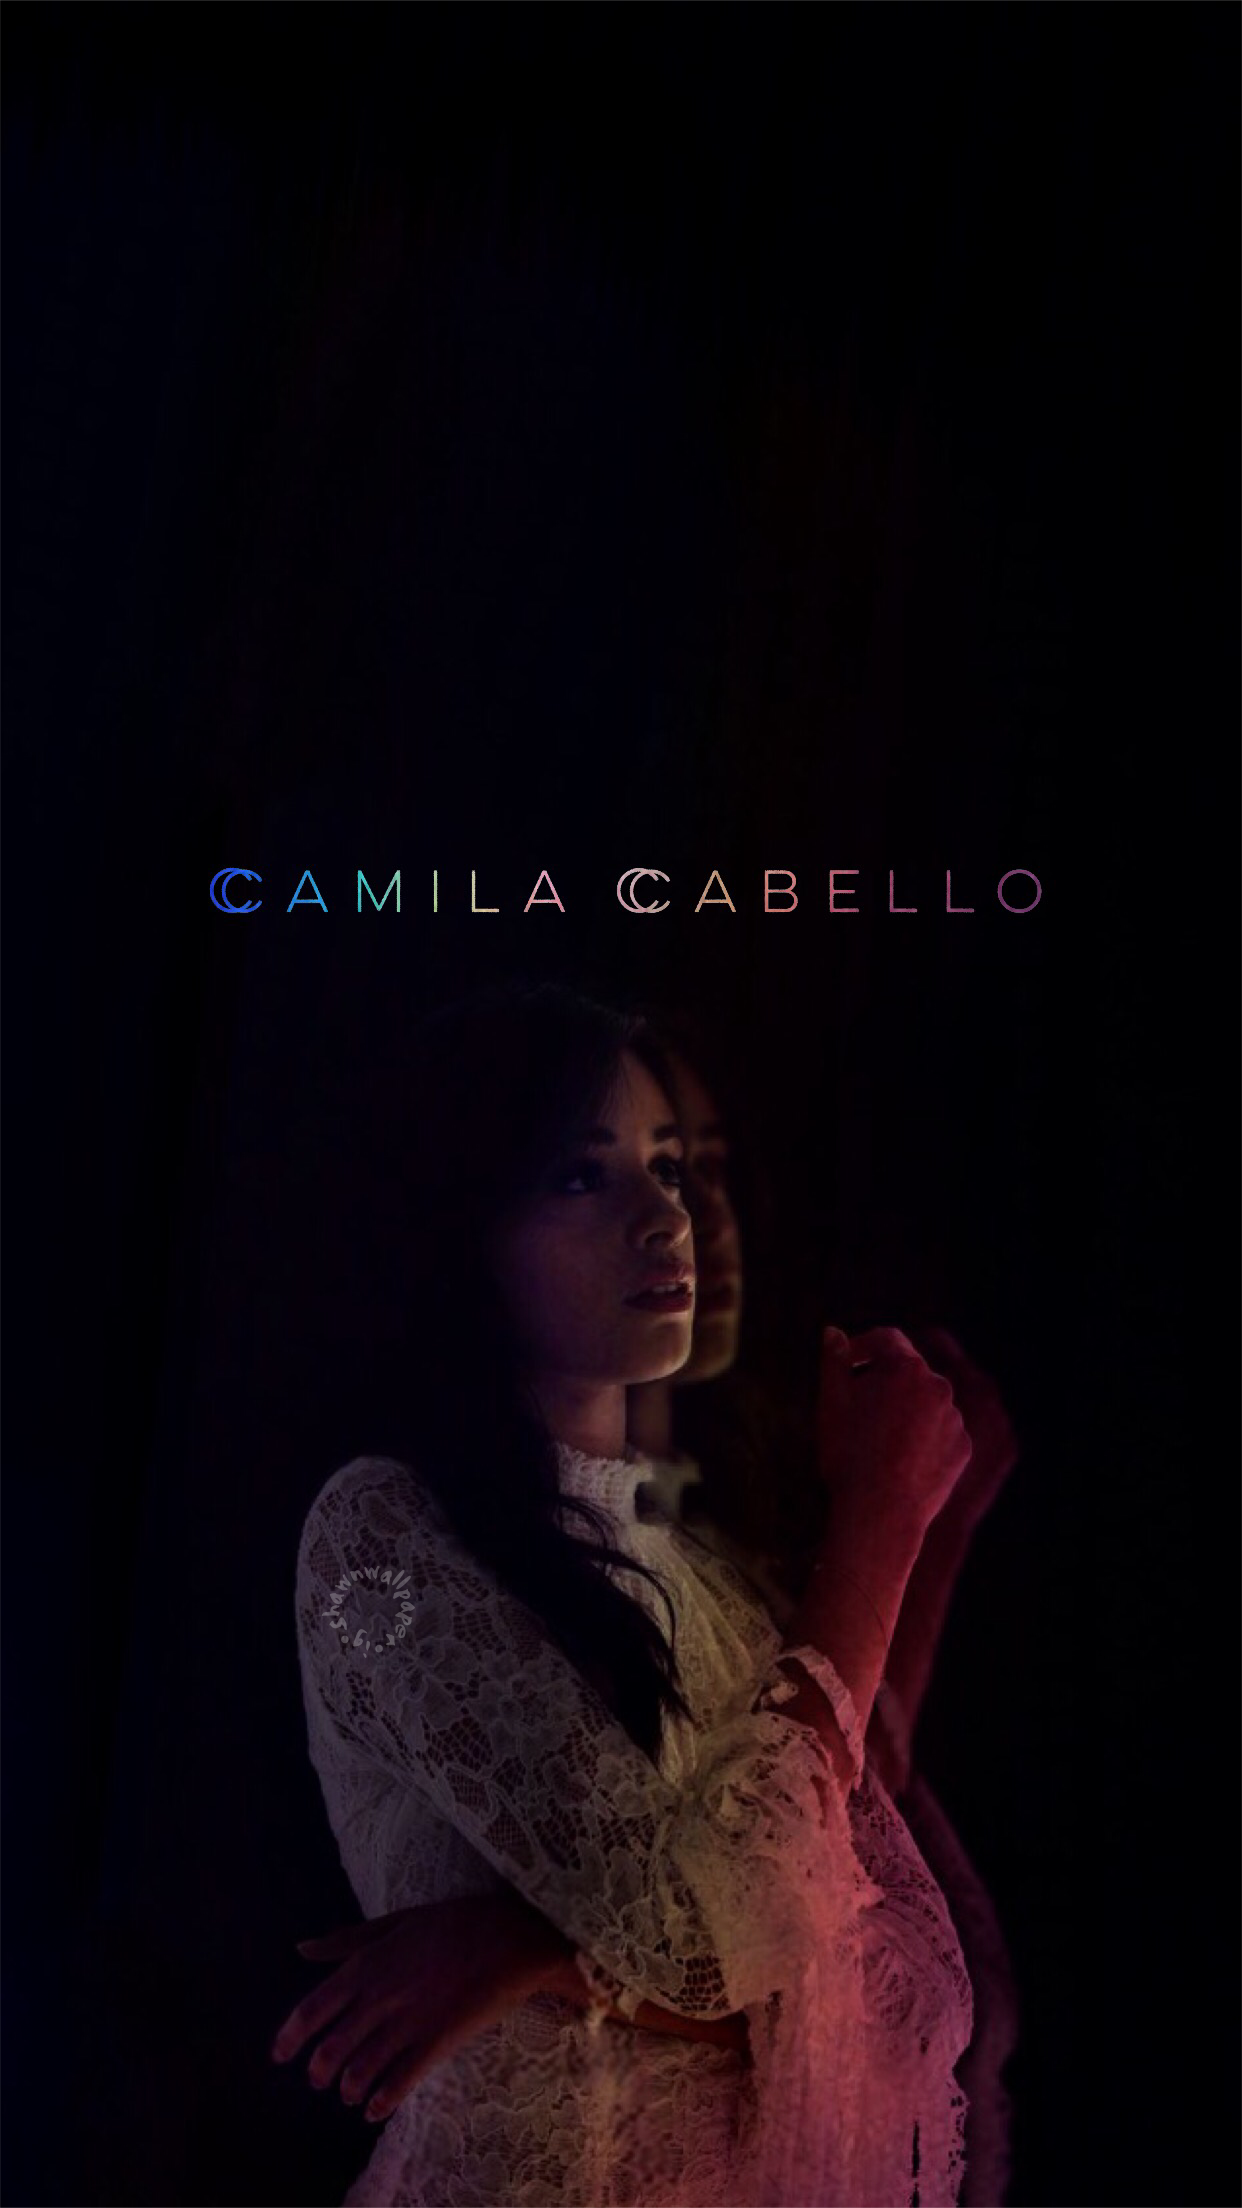 @shawnwallpaper On Ig - Camila Cabello Wallpaper Iphone , HD Wallpaper & Backgrounds